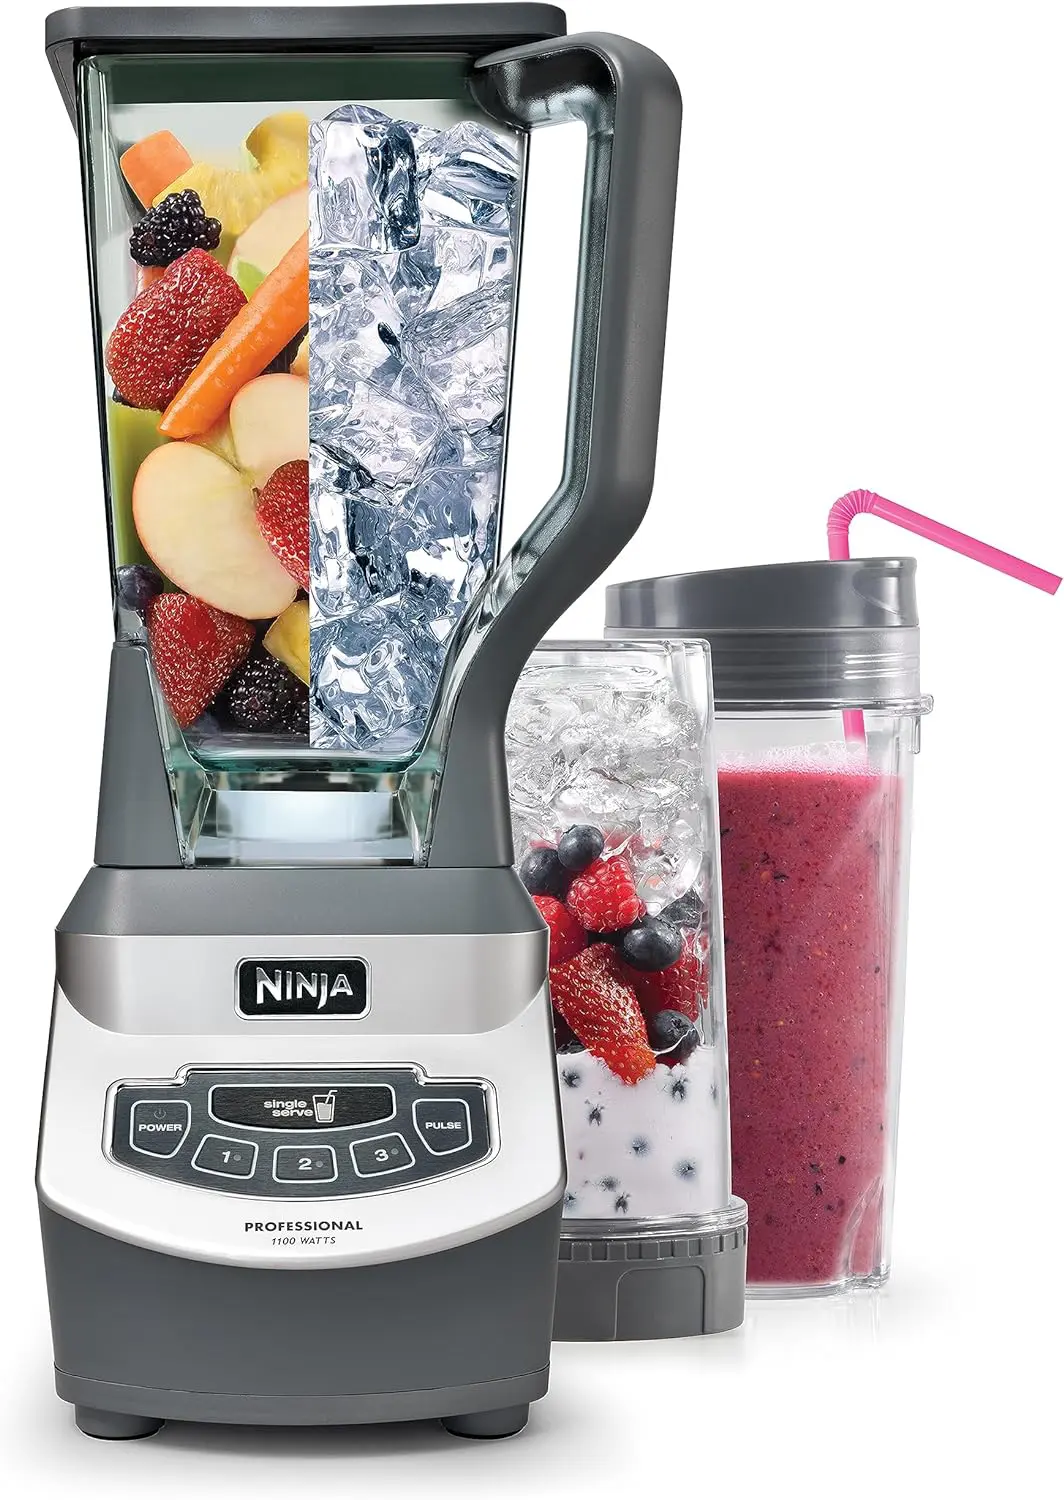 Regarding kitchen appliances, the Ninja BL660 Professional Blender 1100-Watts stands out for its powerful performance and versatility.